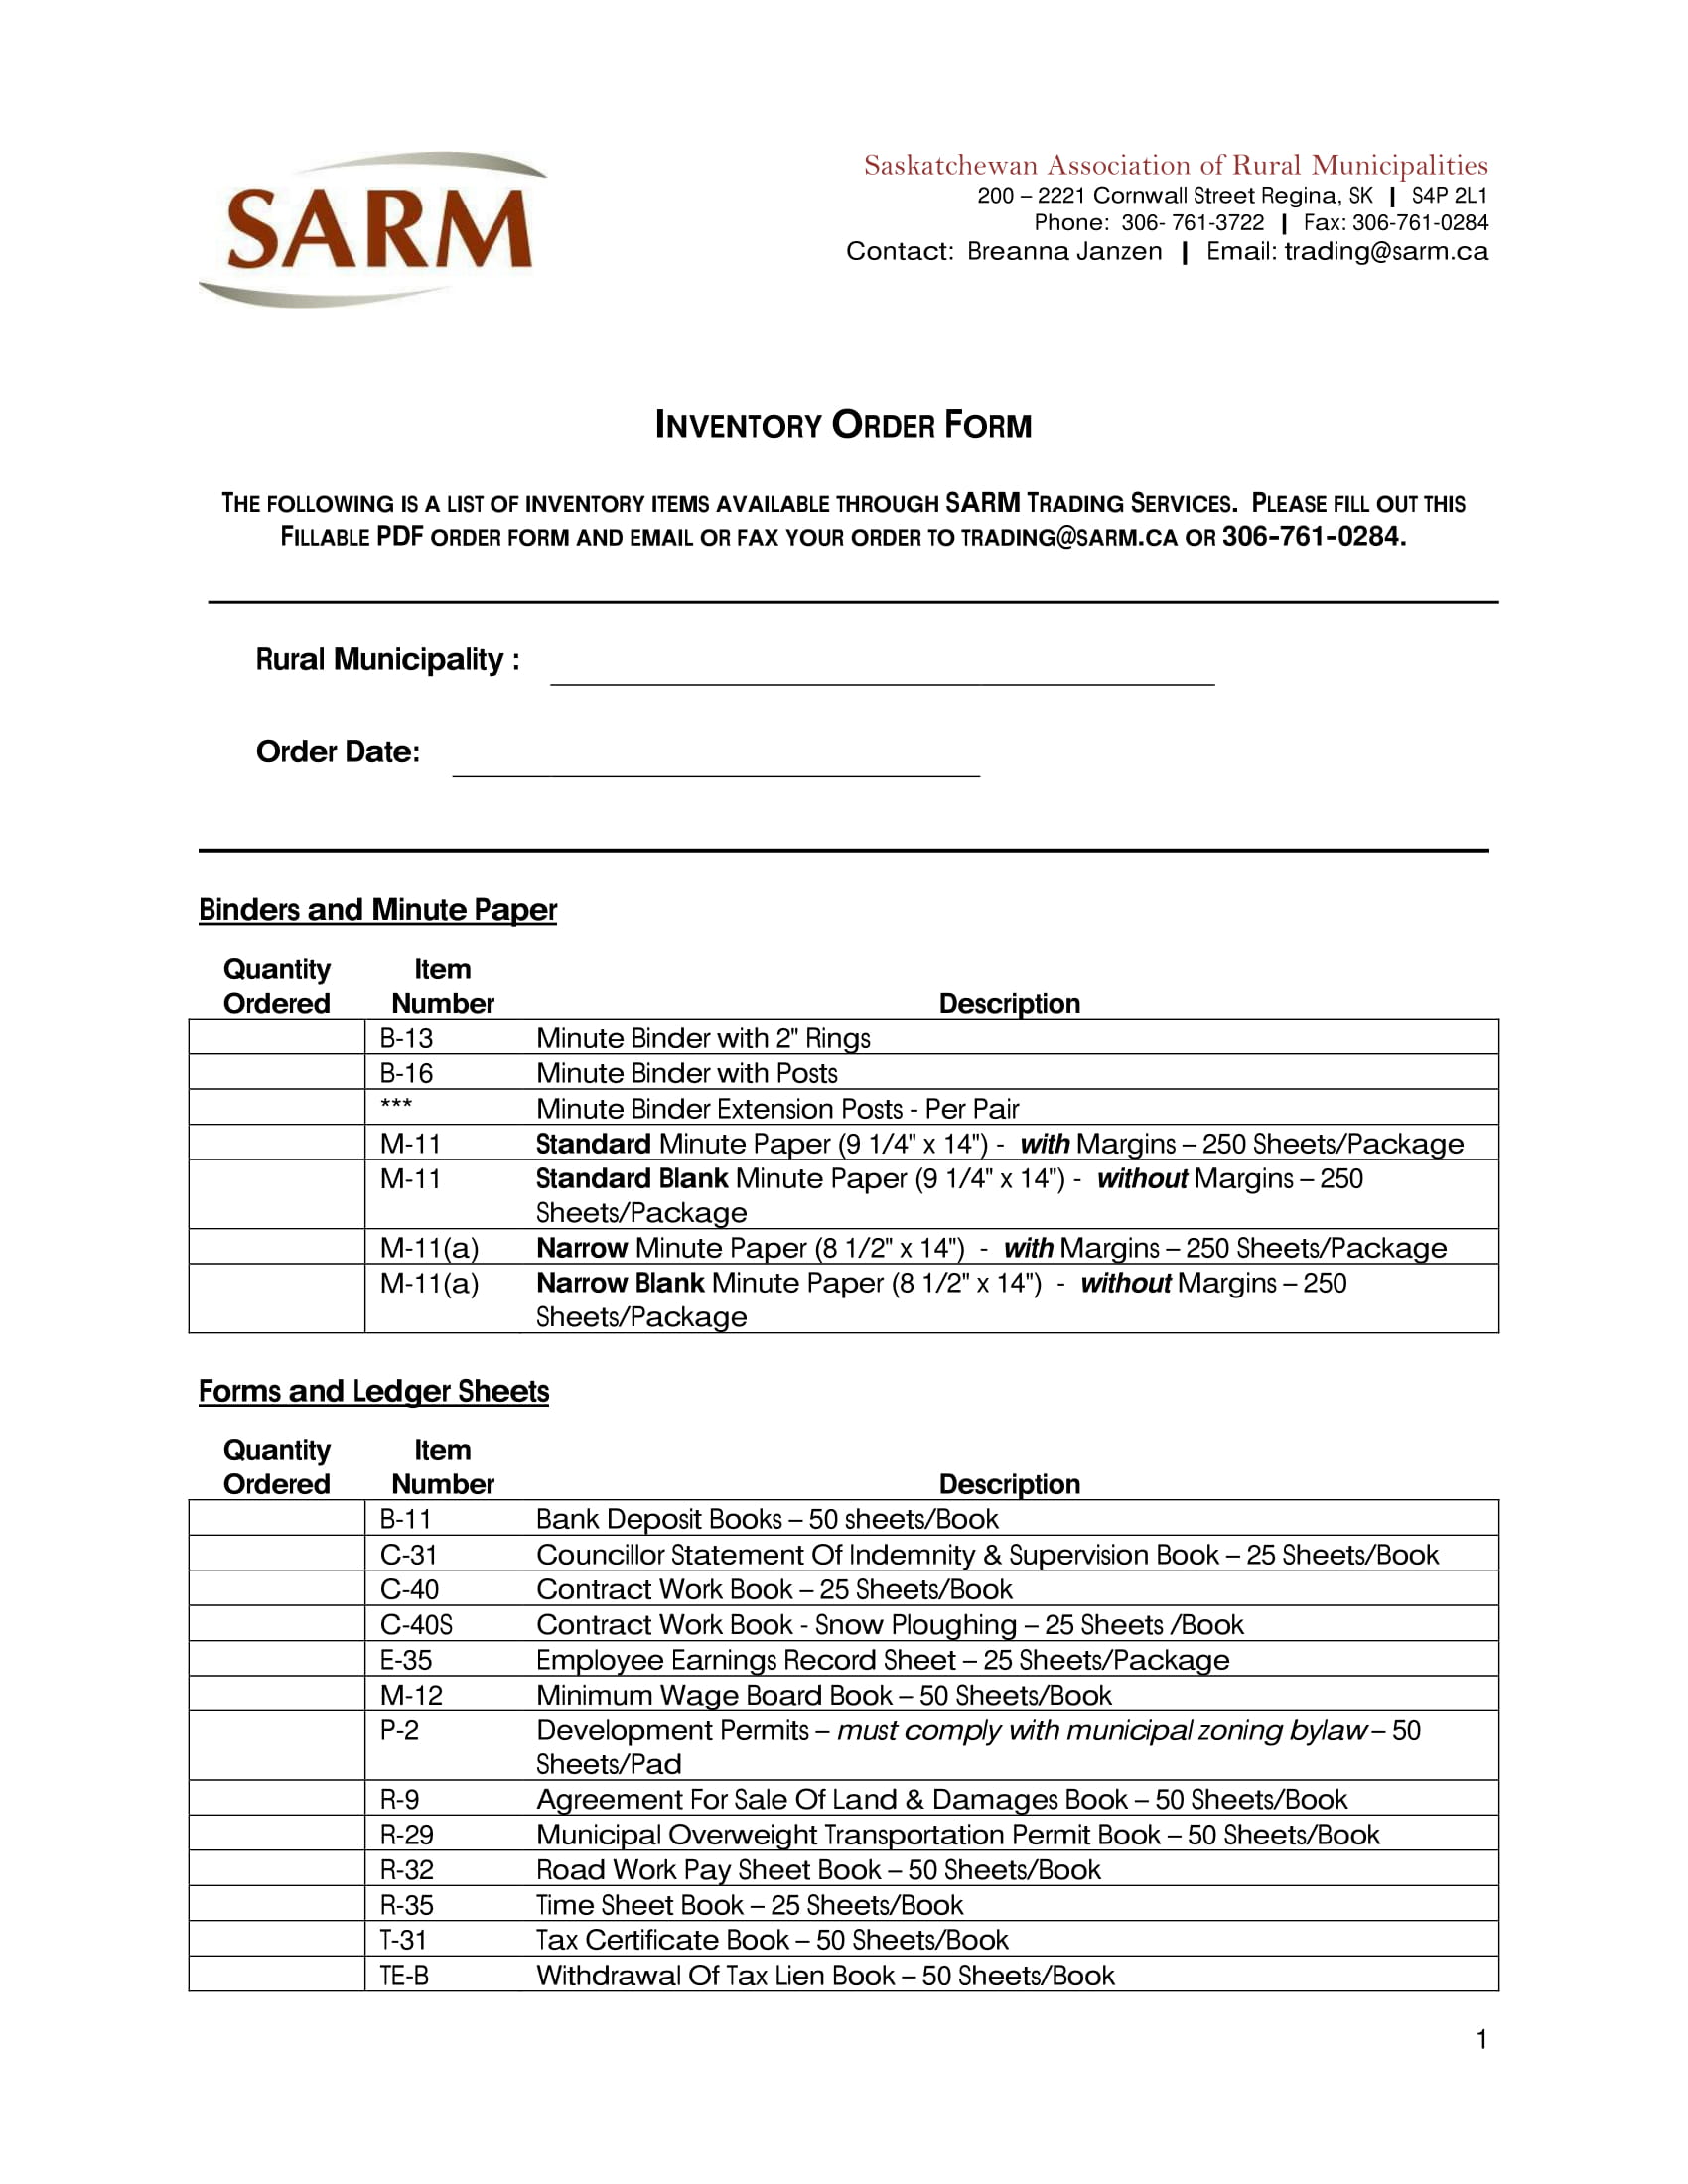 paper product inventory order form 1